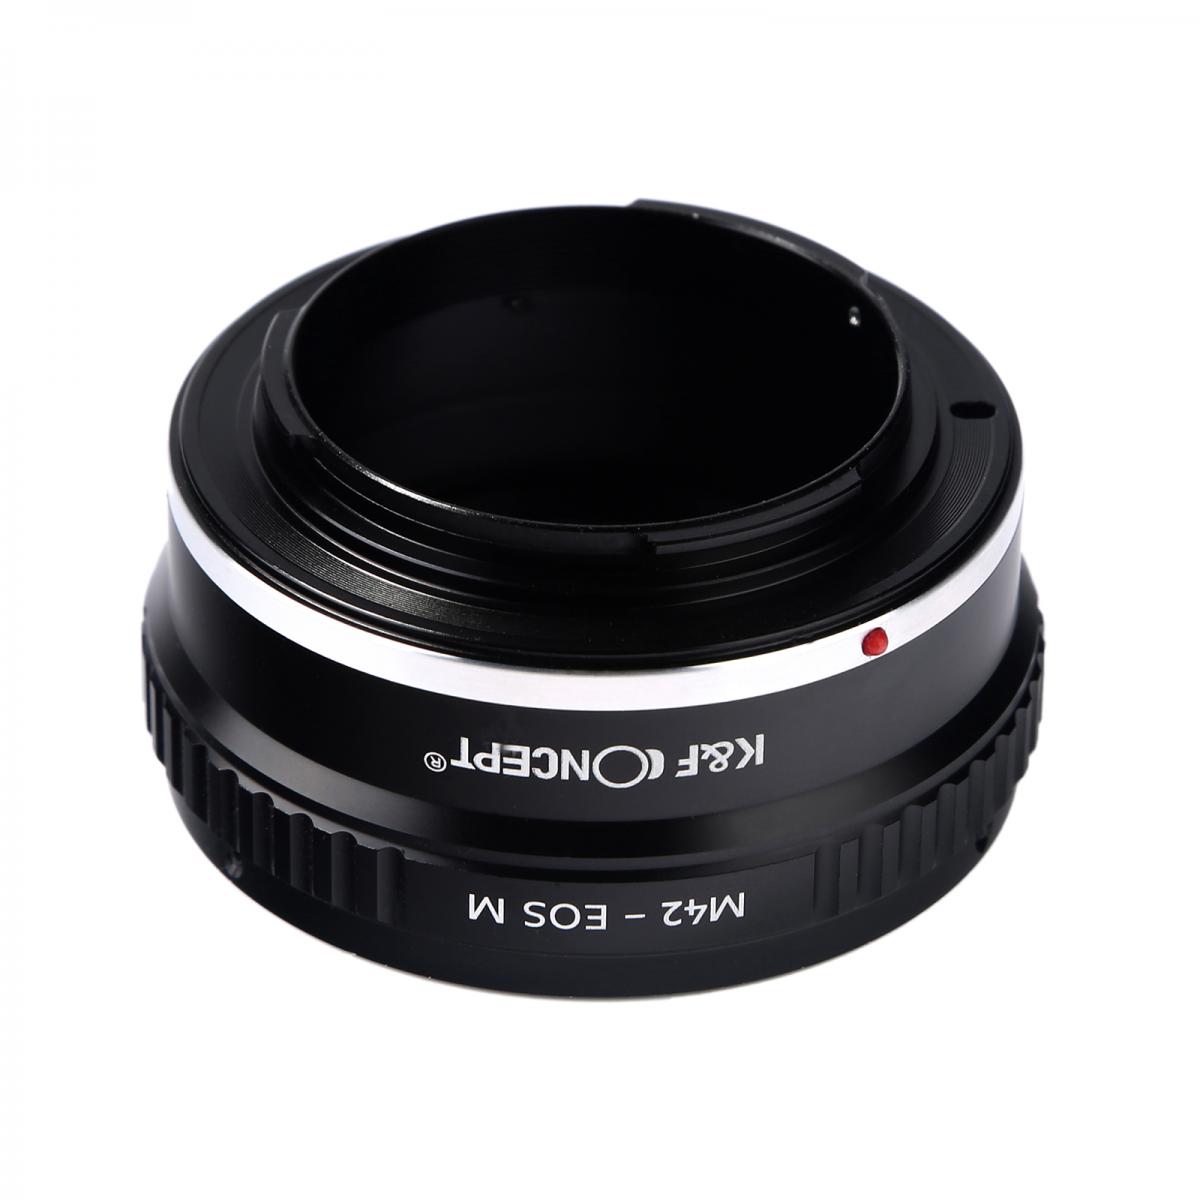 K&F Concept Lens Adapter KF06.137 for M42 - EOS M